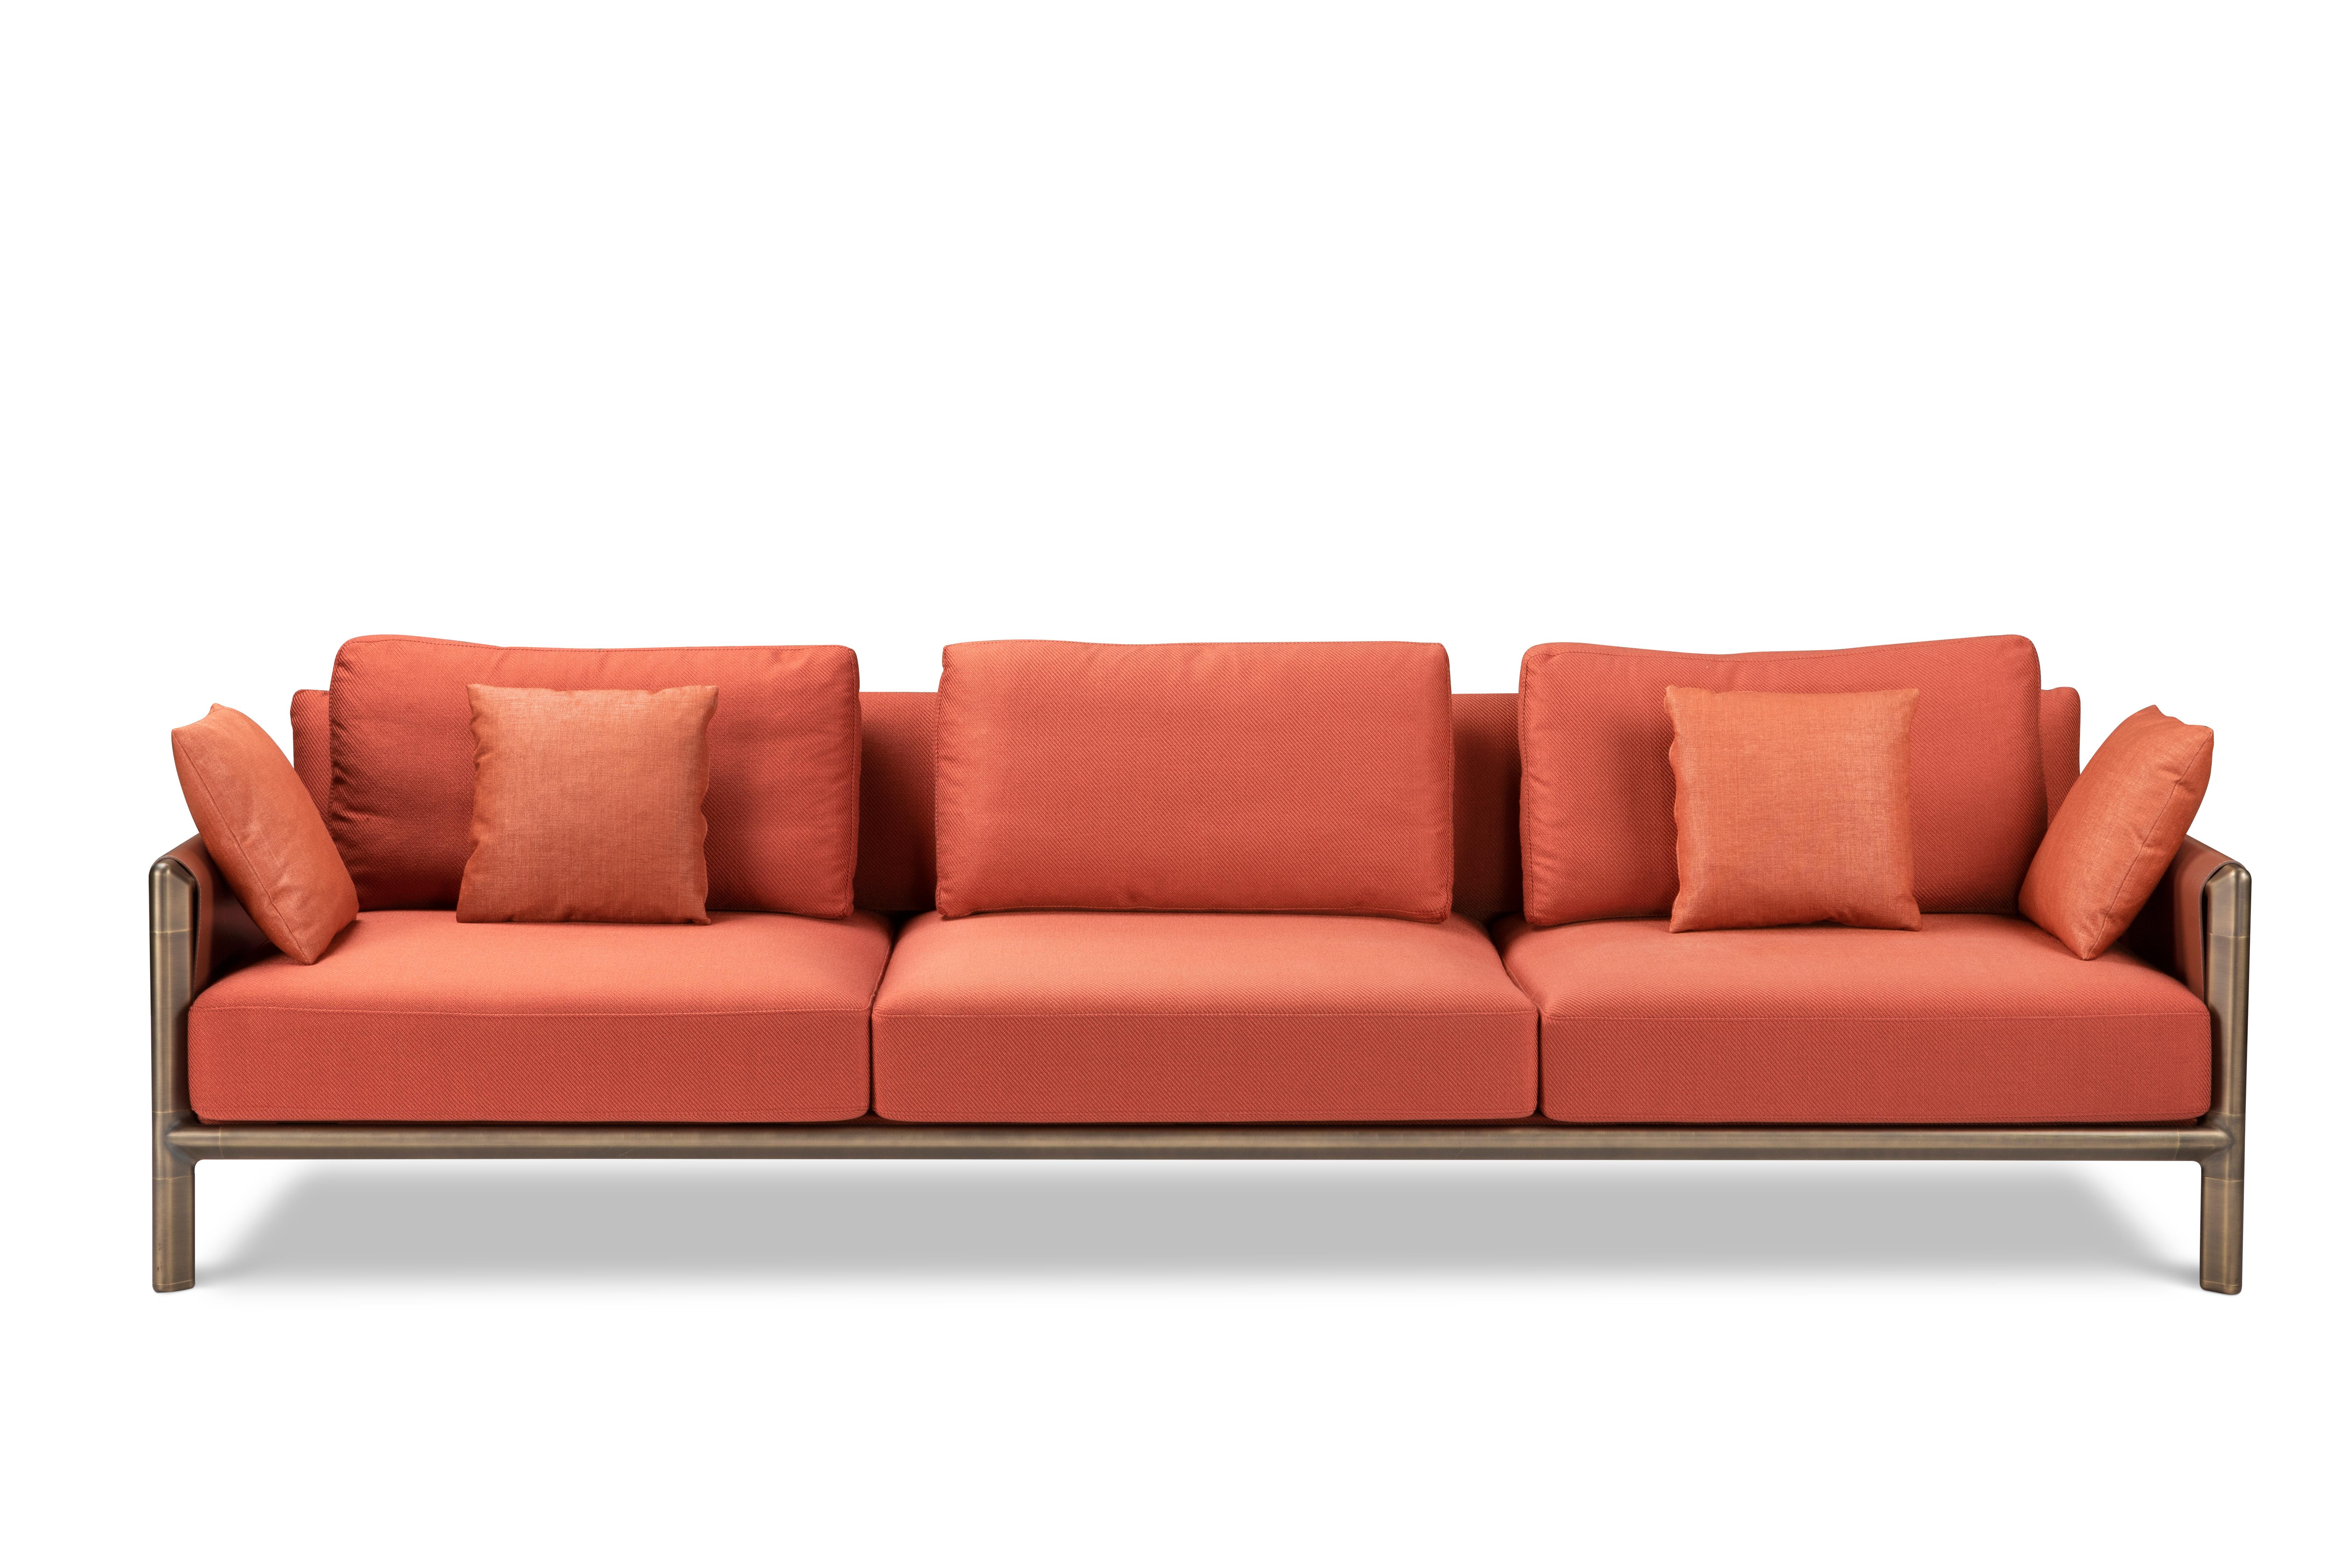 Ghidini 1961 Frame 3-Seat Sofa with Arms in Cuoio Leather by Stefano Giovannoni  For Sale 10